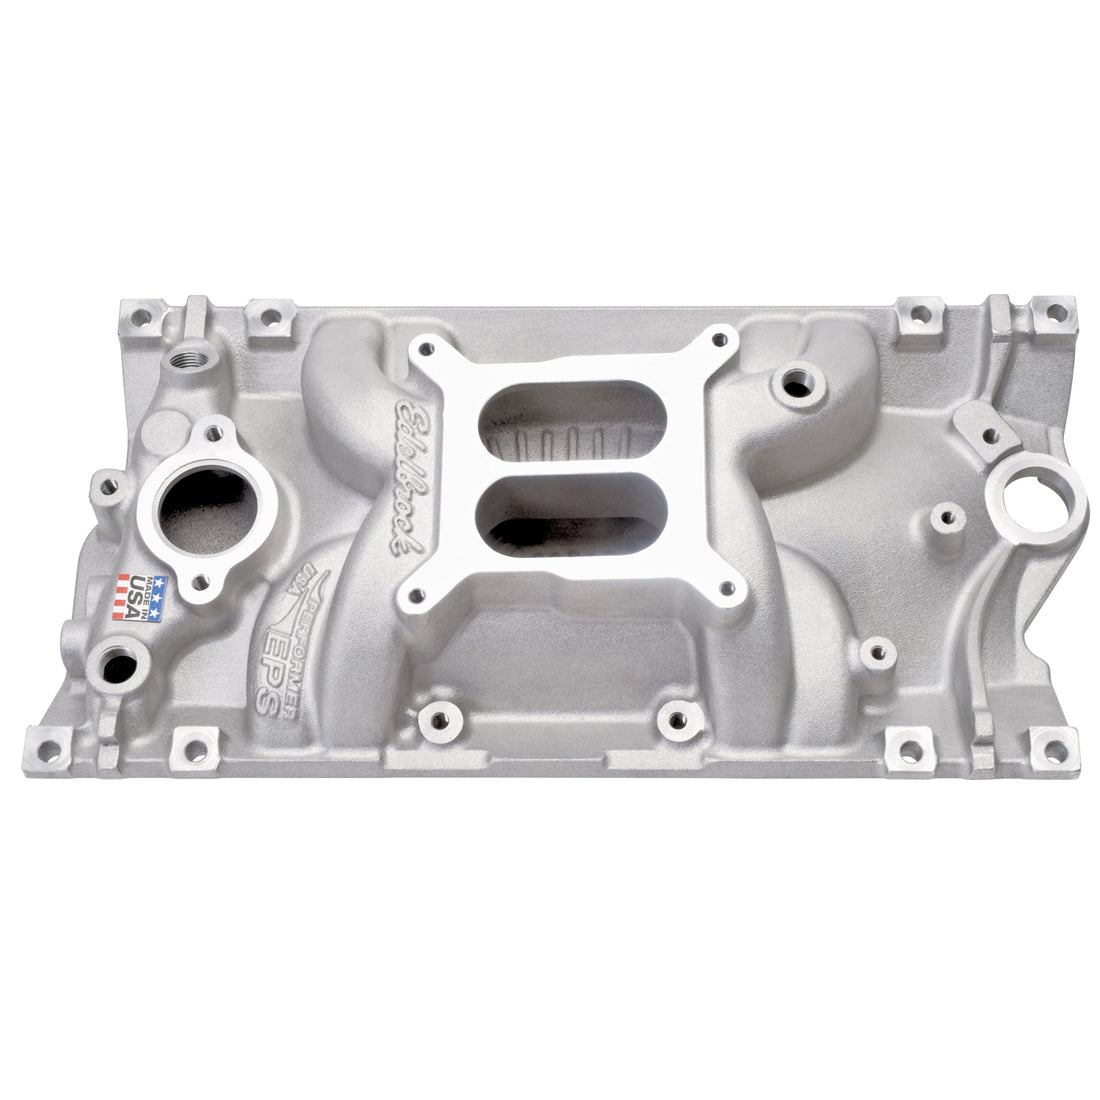 Performer EPS Vortec Intake Manifold for Small-Block Chevy Edelbrock